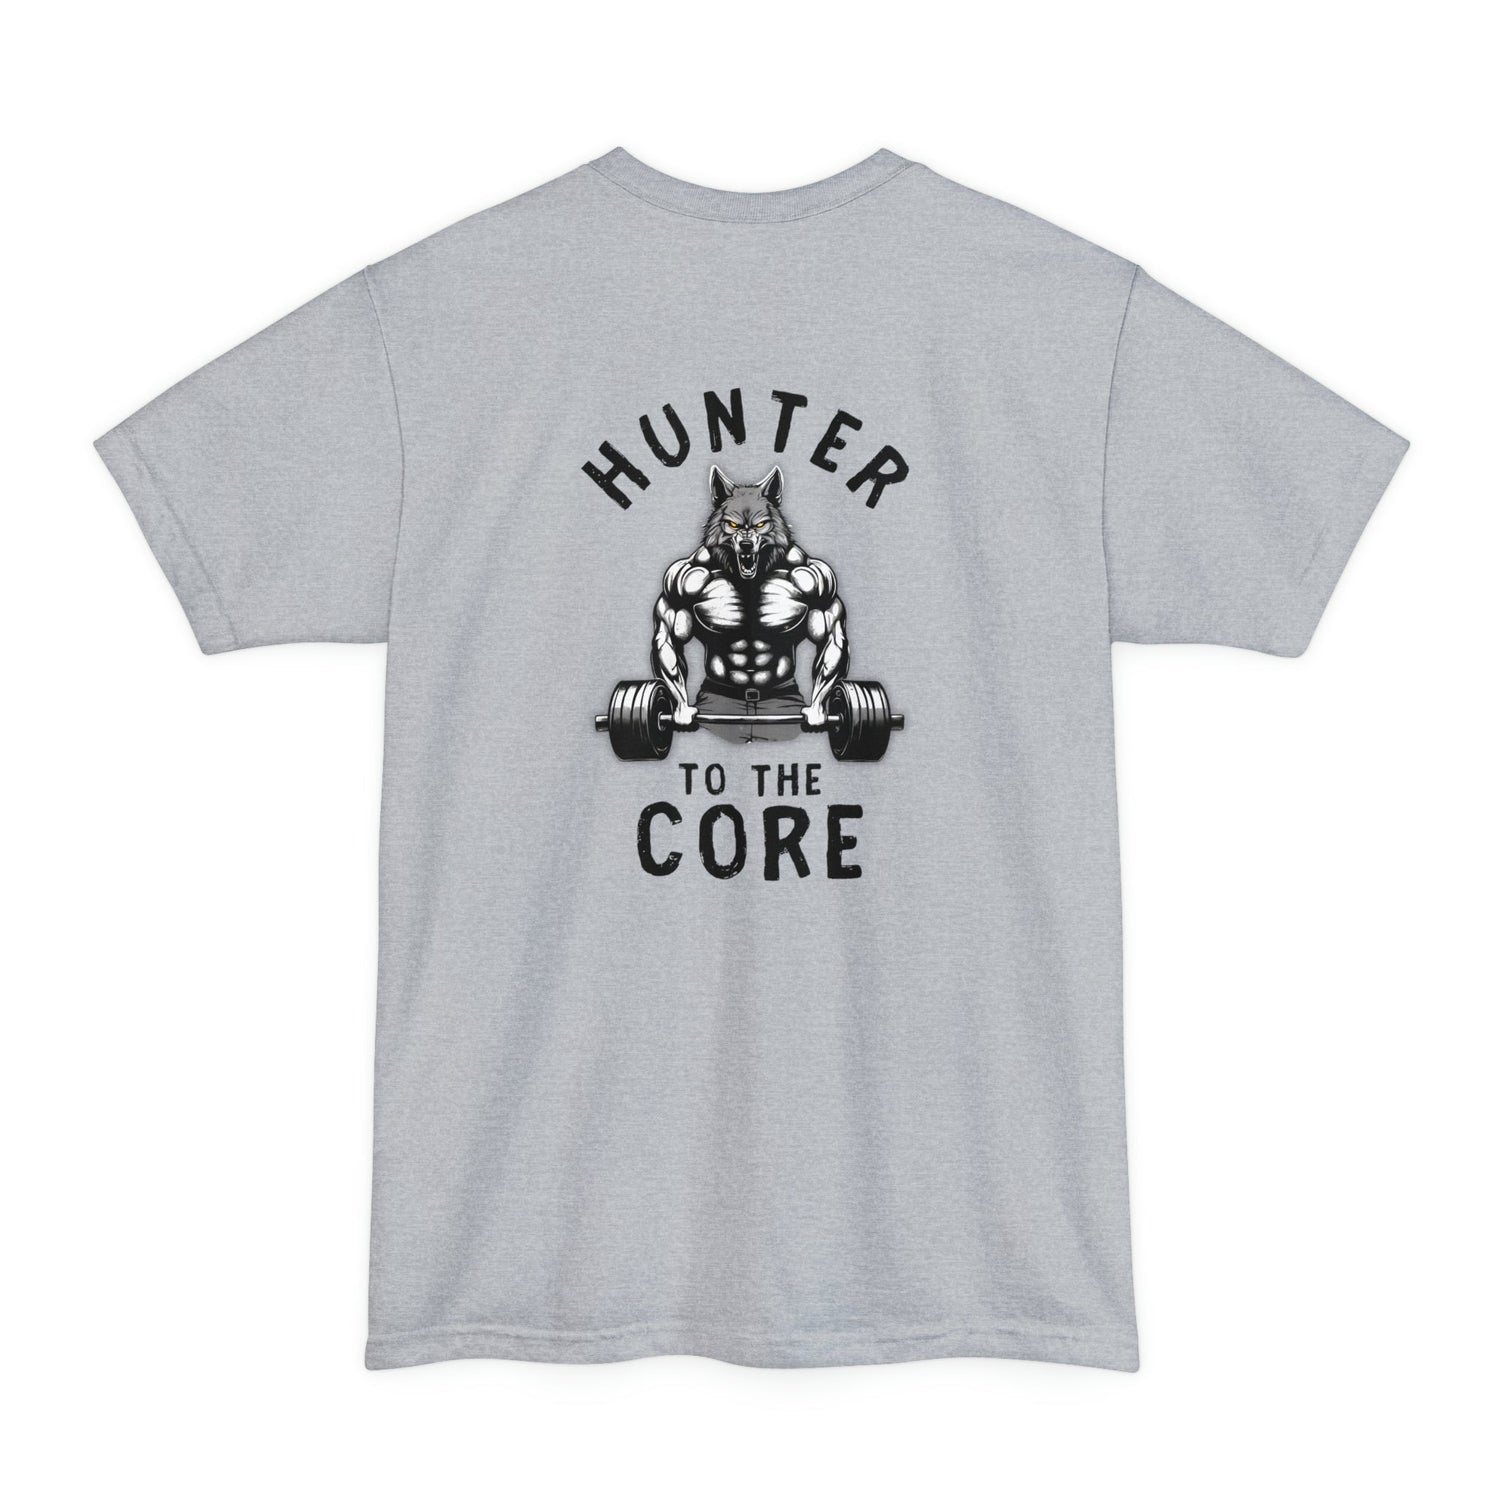 Big and Tall Western Hunting T-Shirt - Hunter to the Core